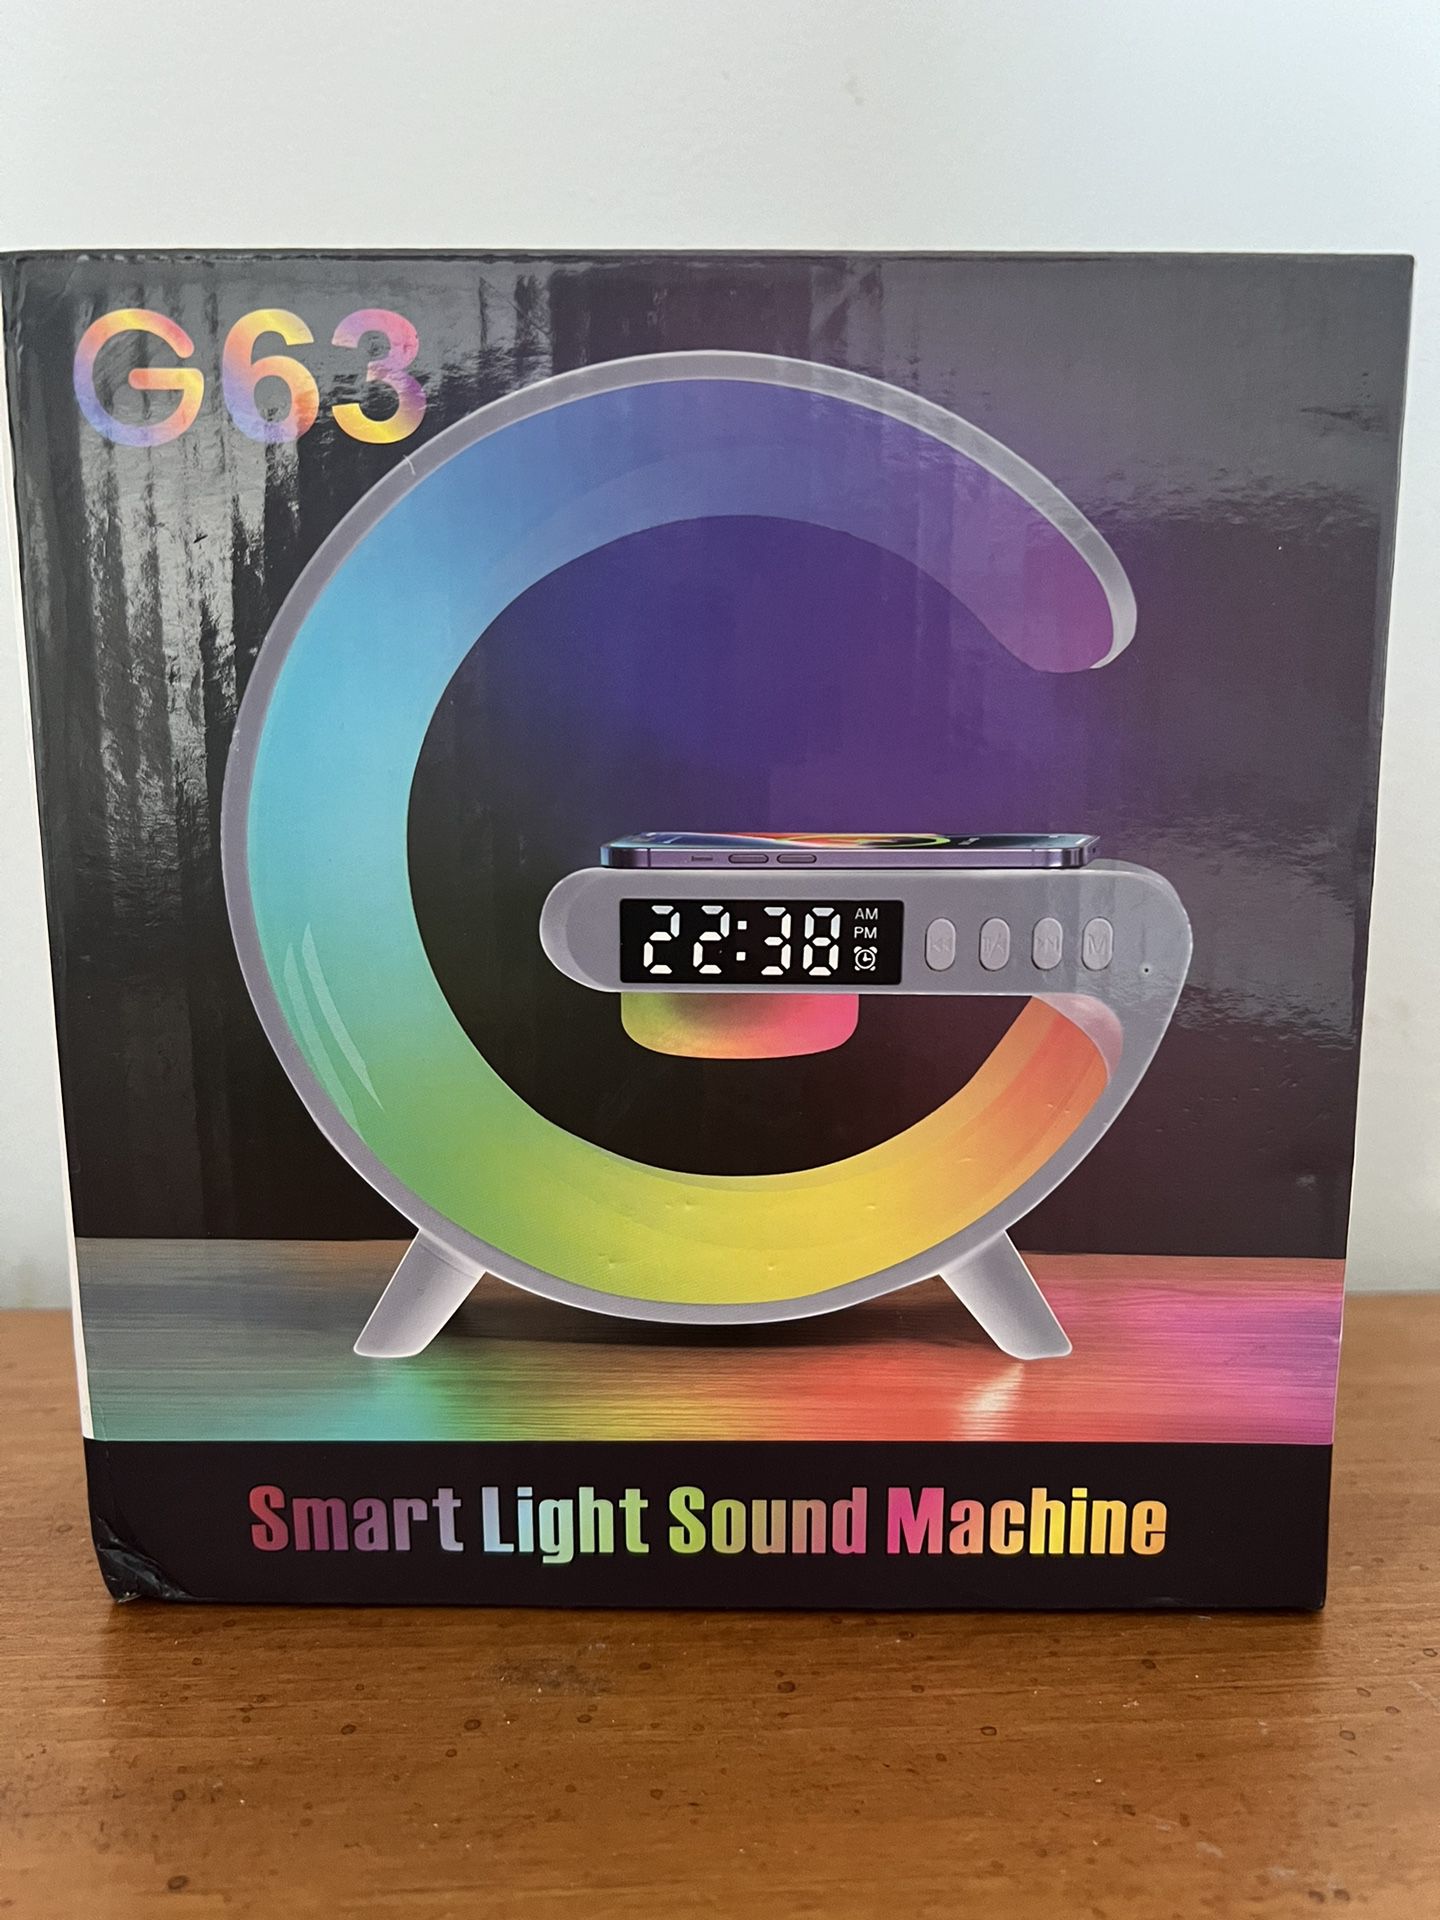 G63 Smart light Sound Machine with lots of features.